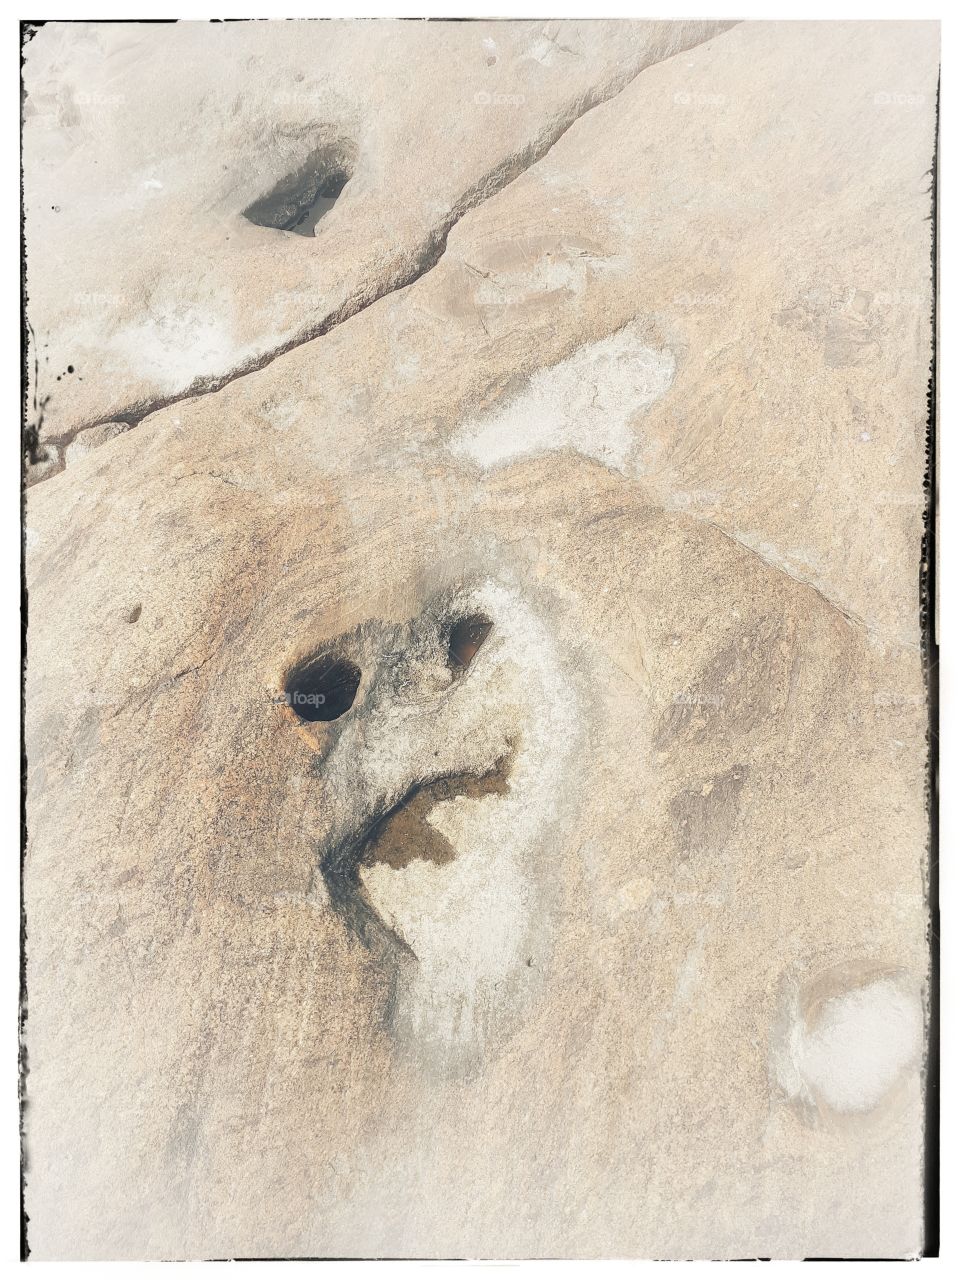 Face in stone